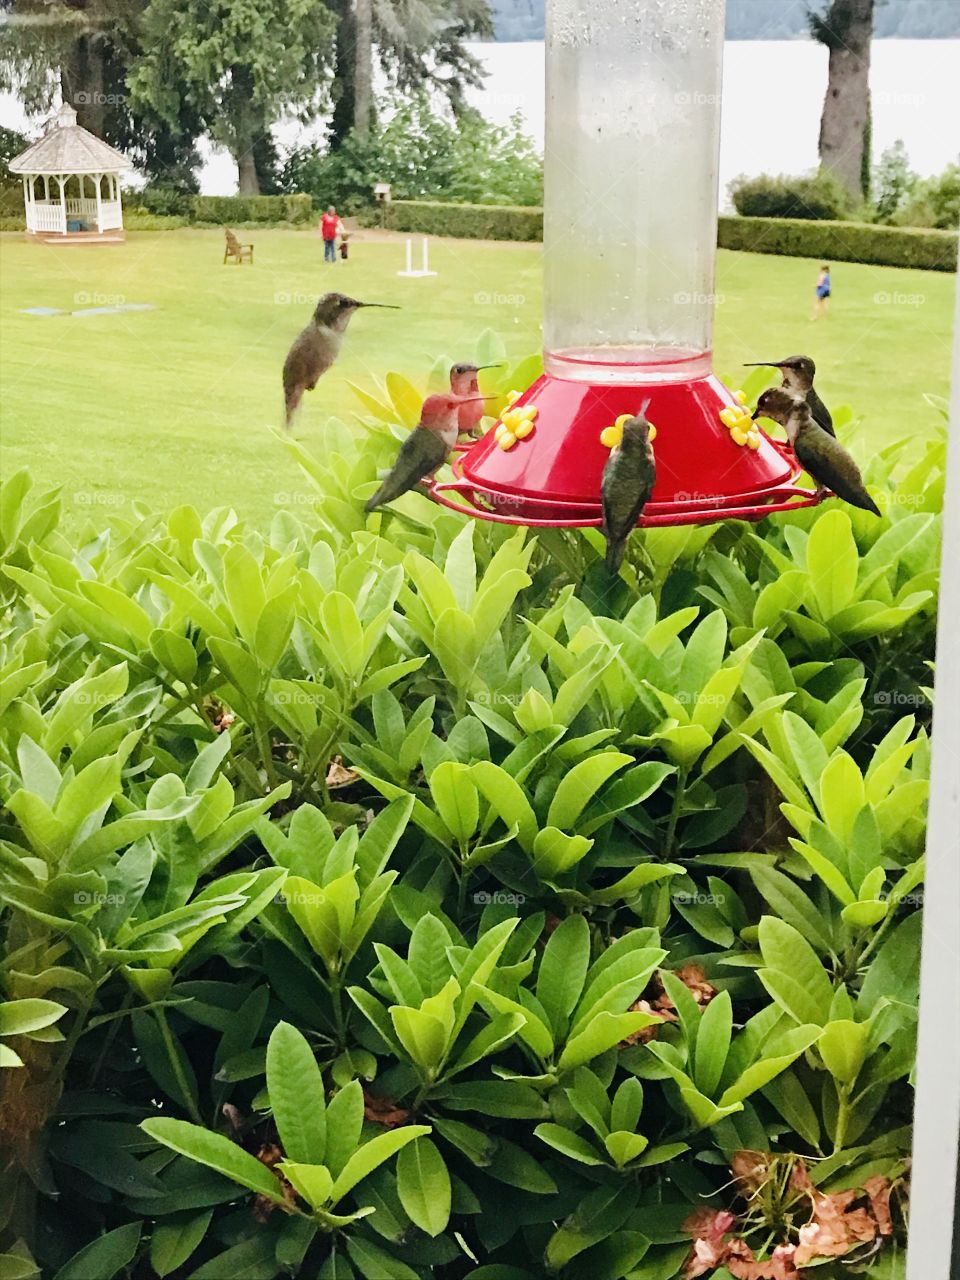 Darling group of hummingbirds all sitting on and flying around feeder above plant! 